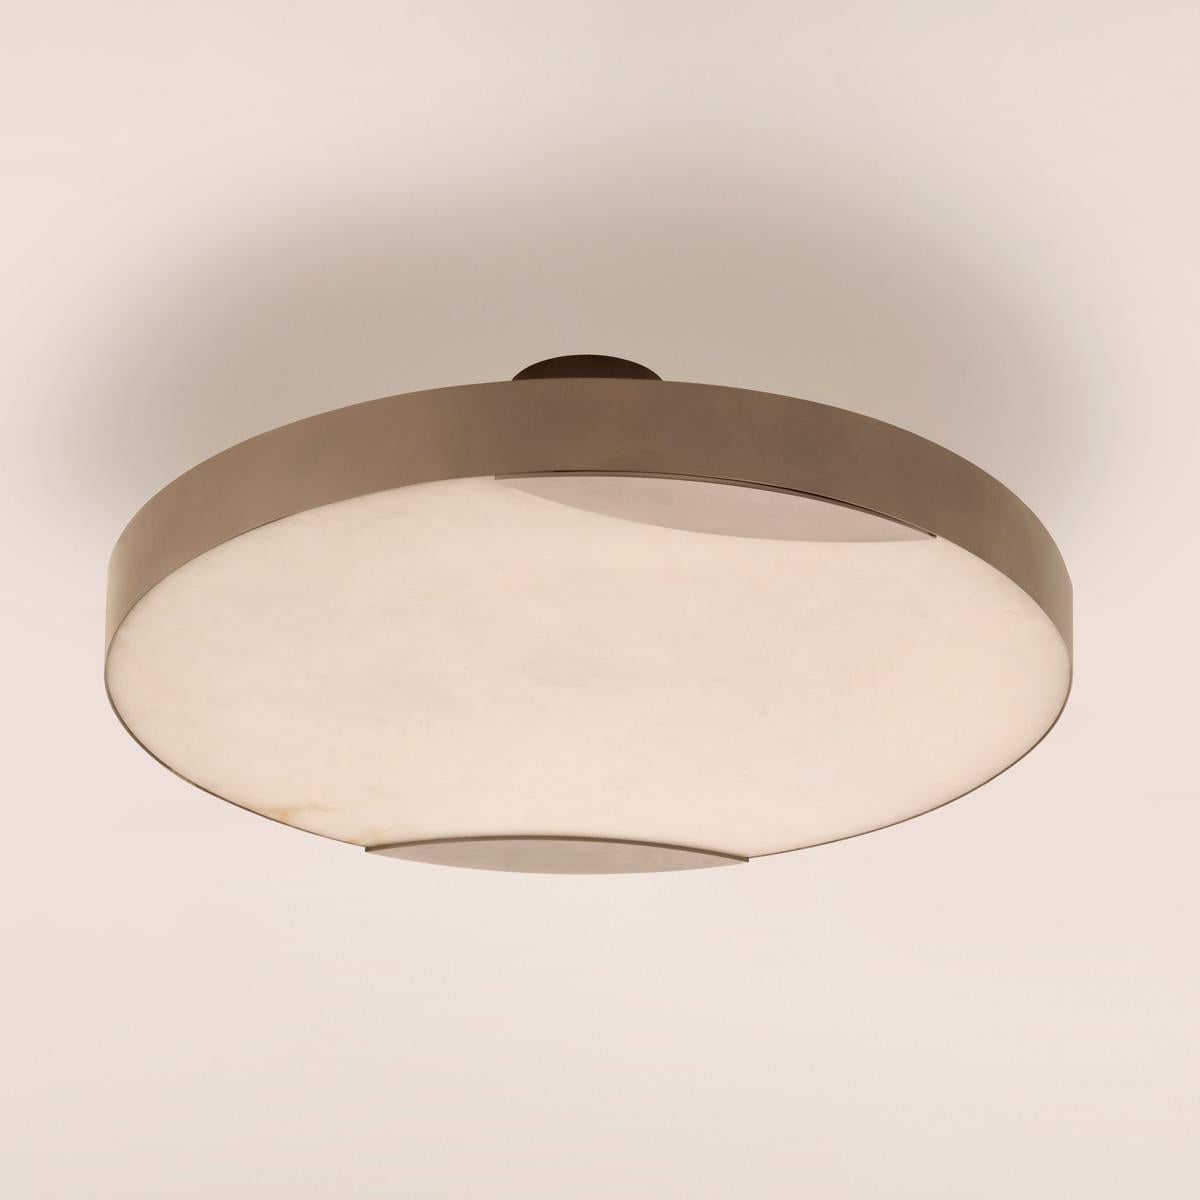 Cloud N.1 Ceiling Light by Gaspare Asaro-Peltro Finish In New Condition For Sale In New York, NY